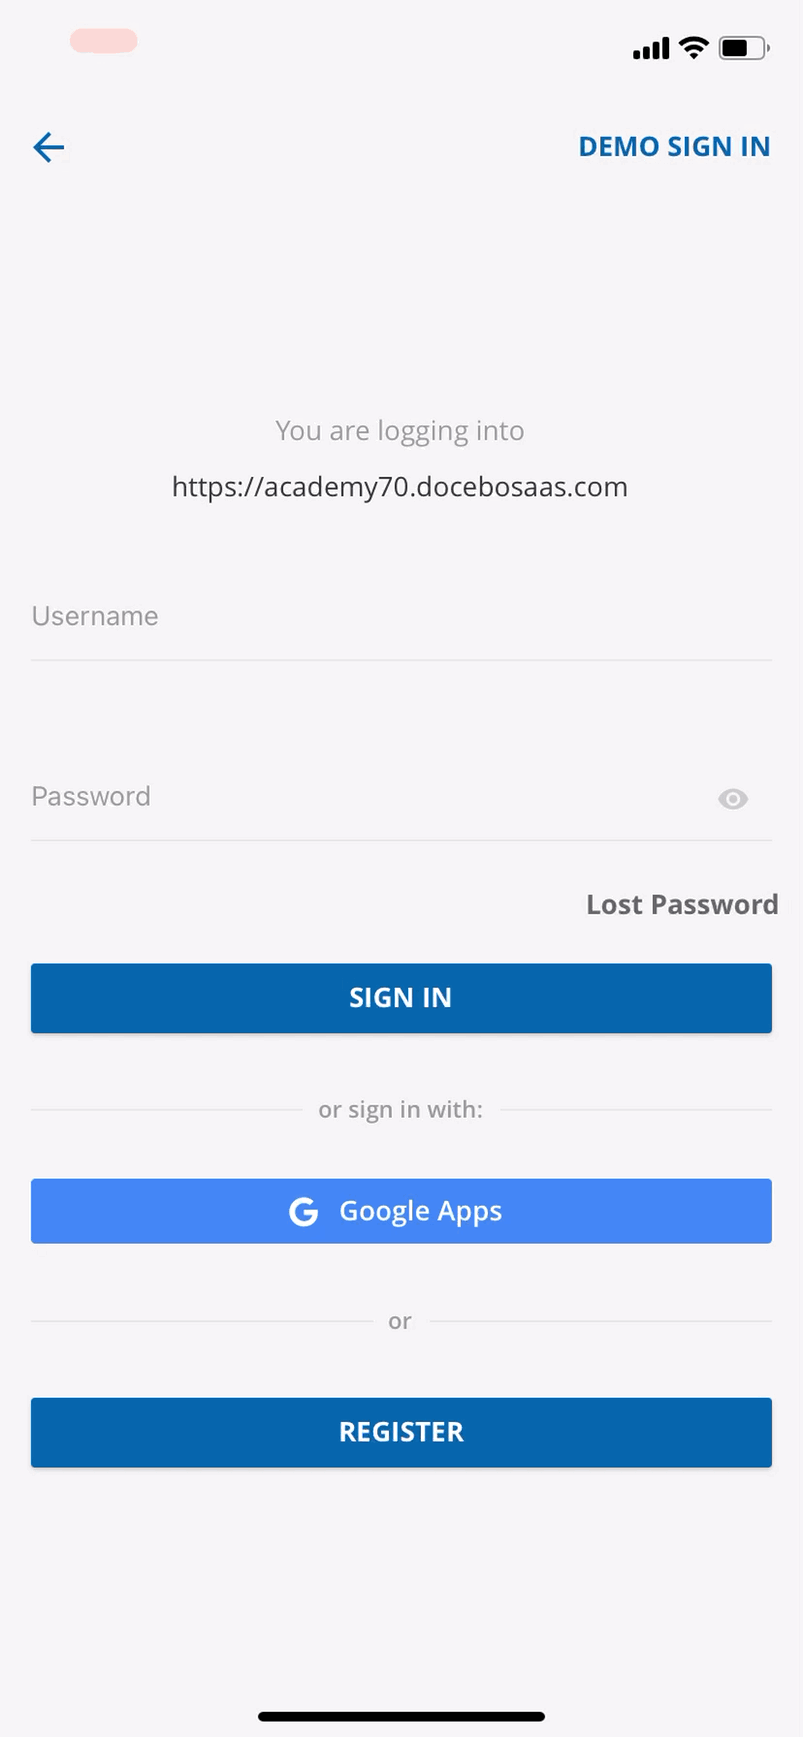 Retrieving_a_Lost_Password_on_the_mobile_app.gif